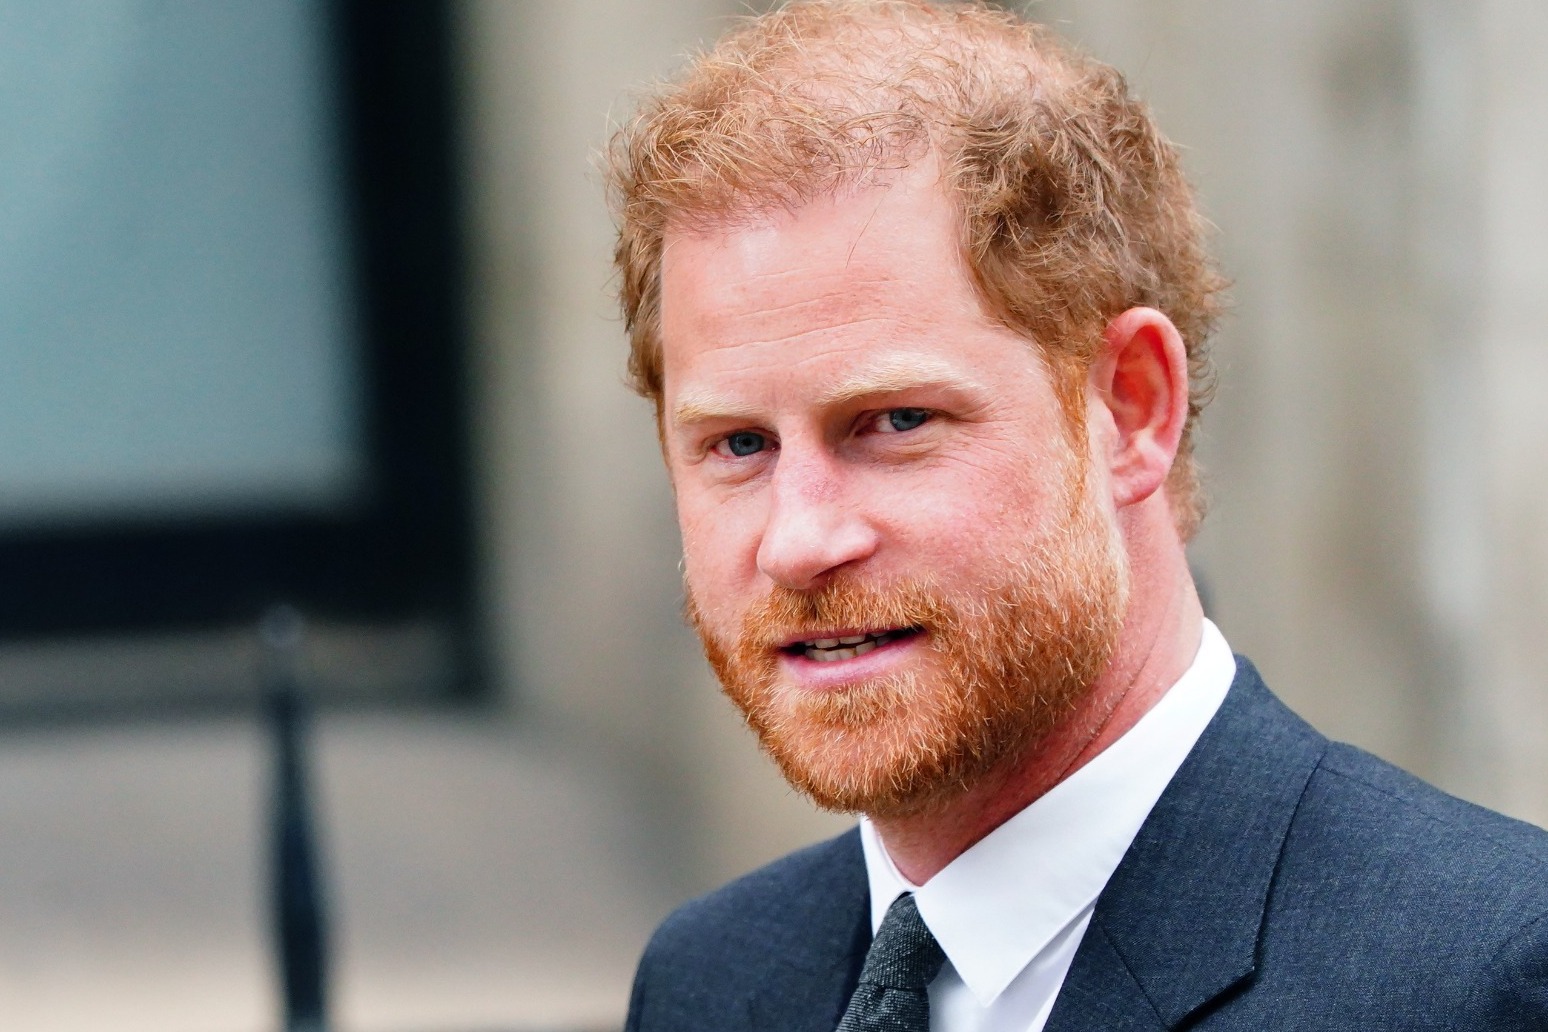 Duke of Sussex awarded £140,600 in phone hacking claim against Mirror Group 